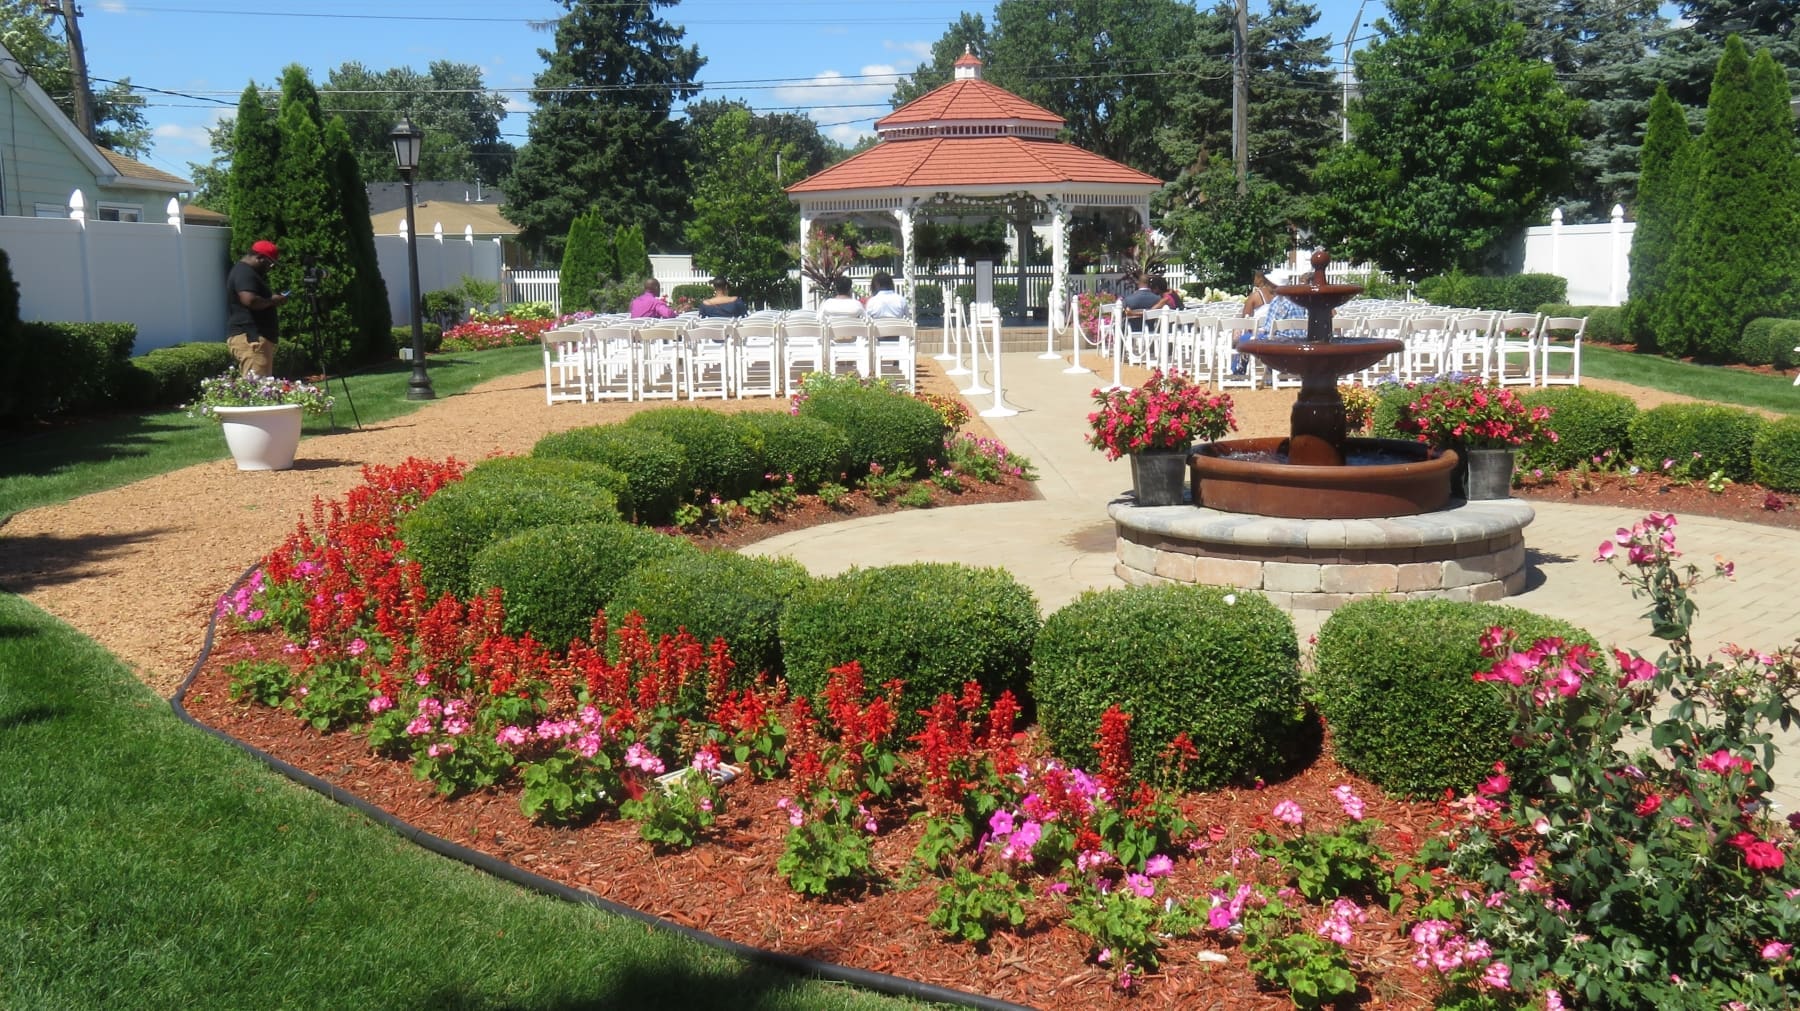 A gazebo with chairs and flowers around it